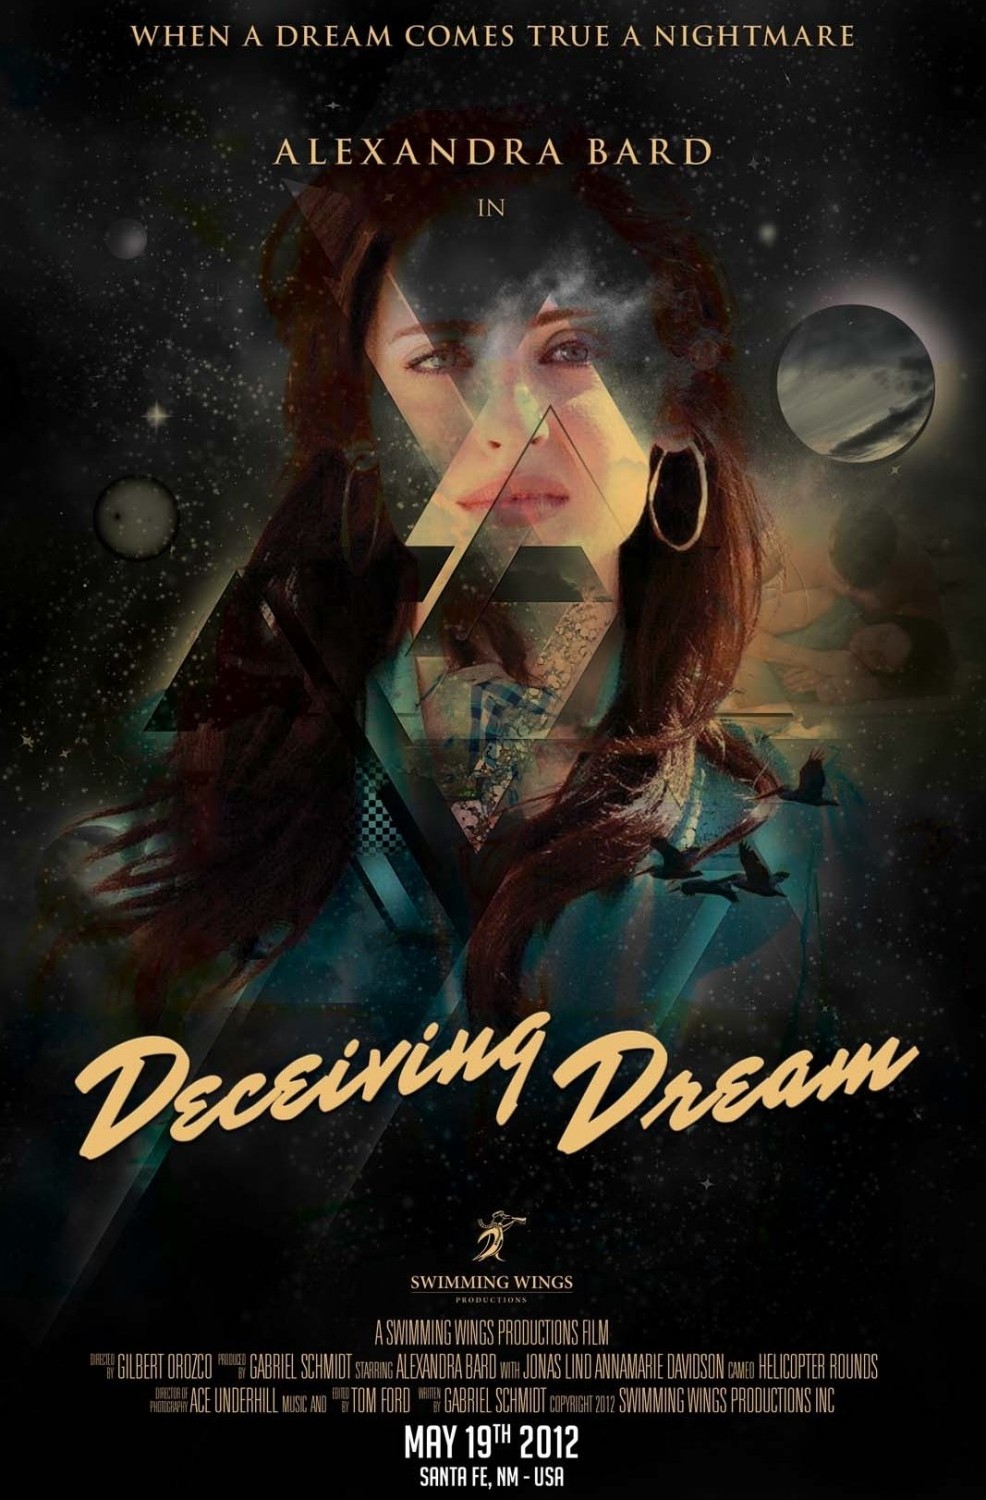 Extra Large Movie Poster Image for Deceiving Dream